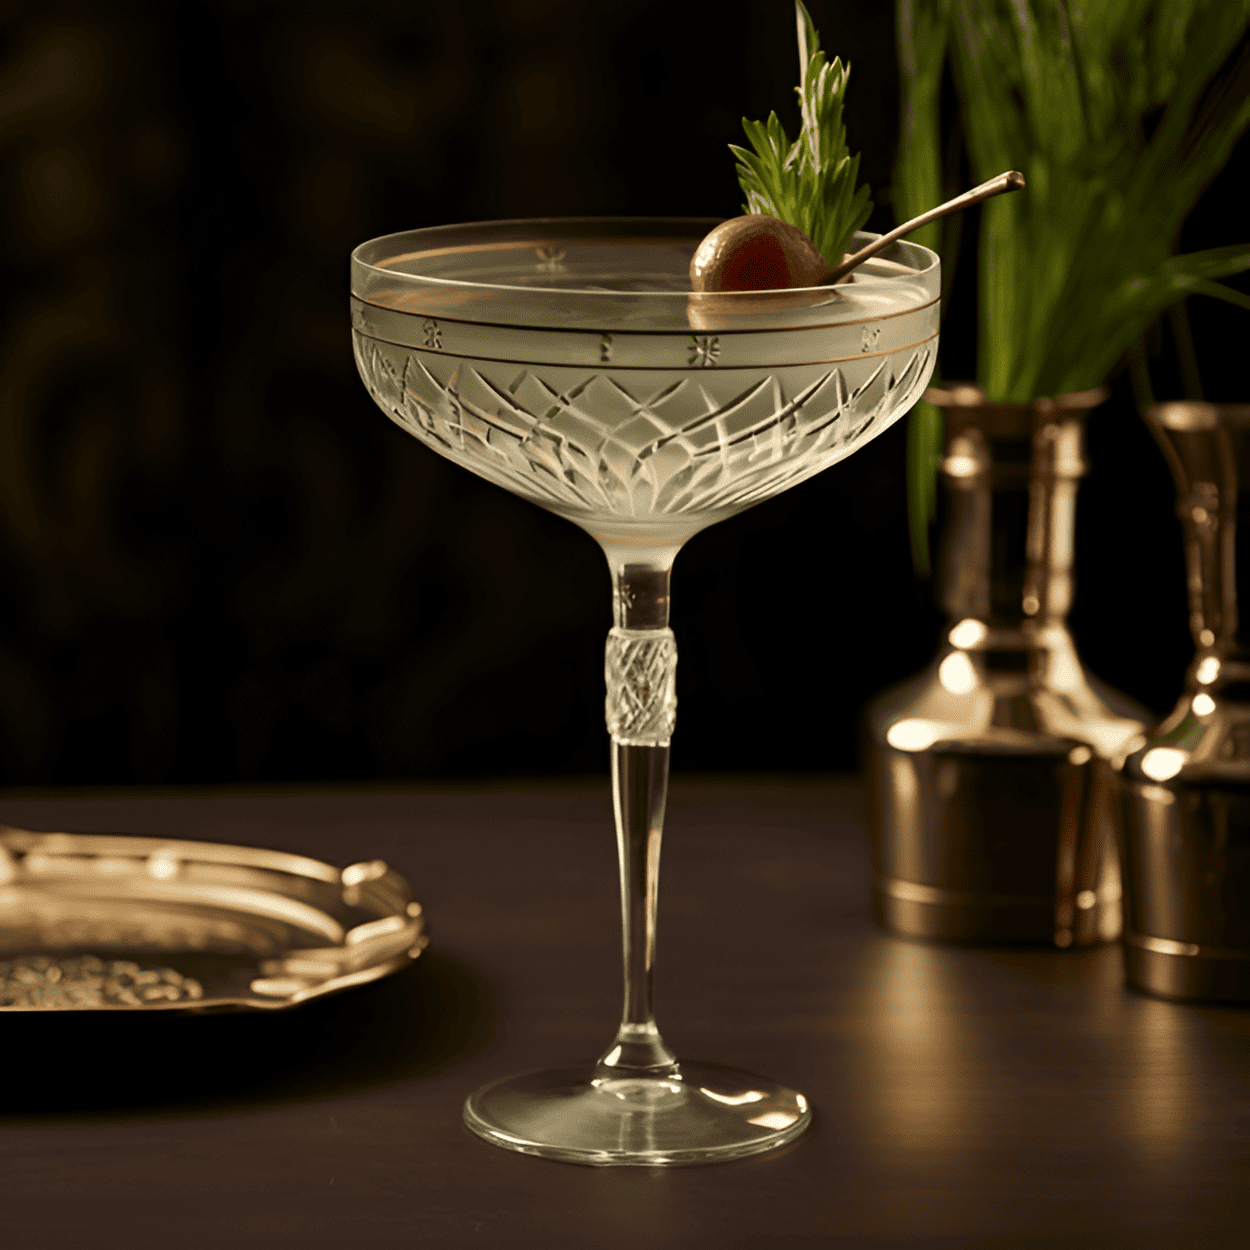 Tuxedo Cocktail Recipe - The Tuxedo cocktail is a complex and balanced drink with a slightly sweet, herbal, and citrusy flavor profile. It has a smooth and silky texture, with a hint of bitterness from the vermouth and a warming, slightly spicy finish from the gin.